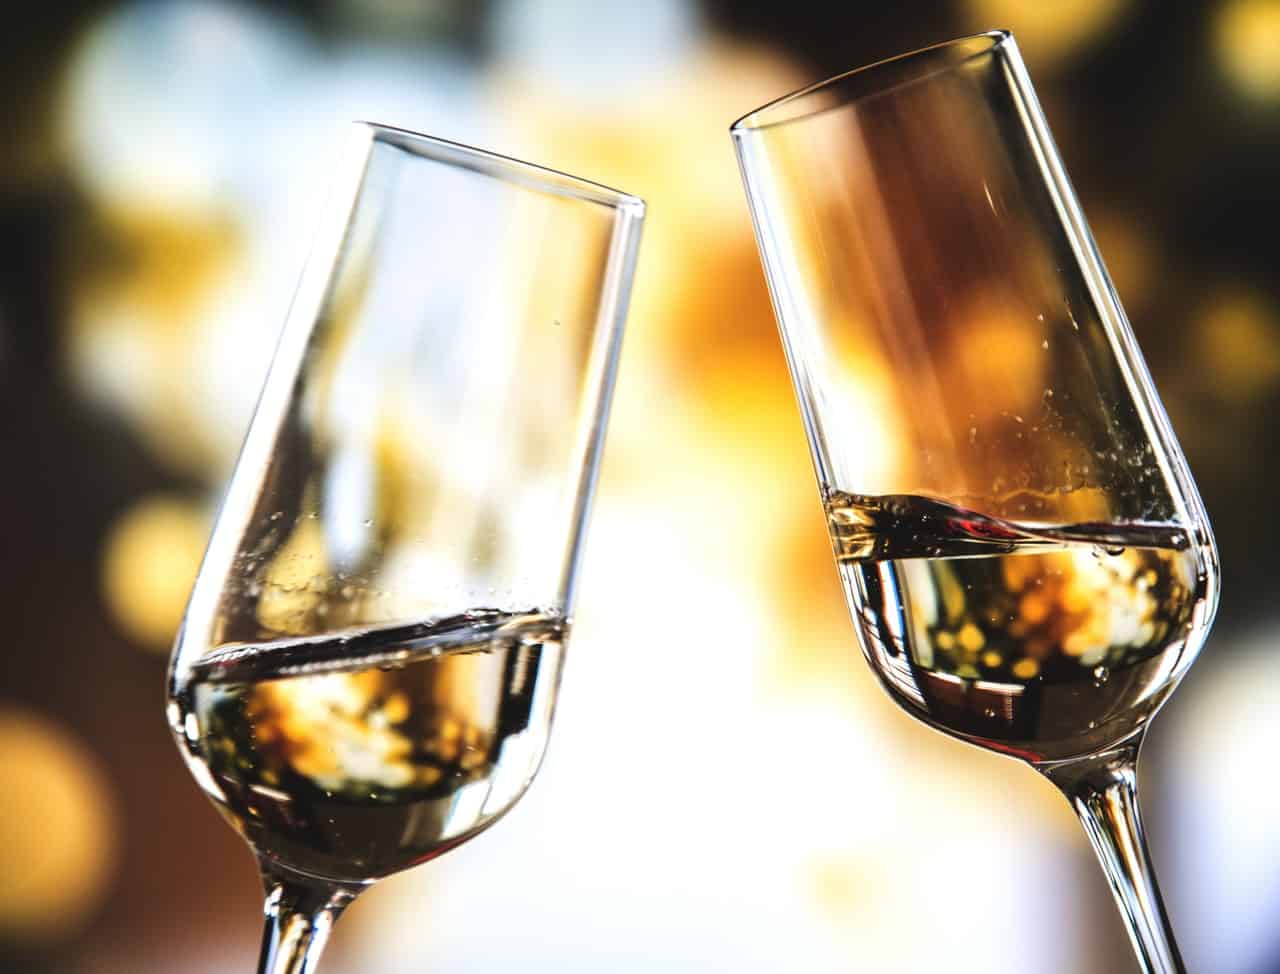 High-quality dry champagne and sparking wine are good choices for acne-prone skin